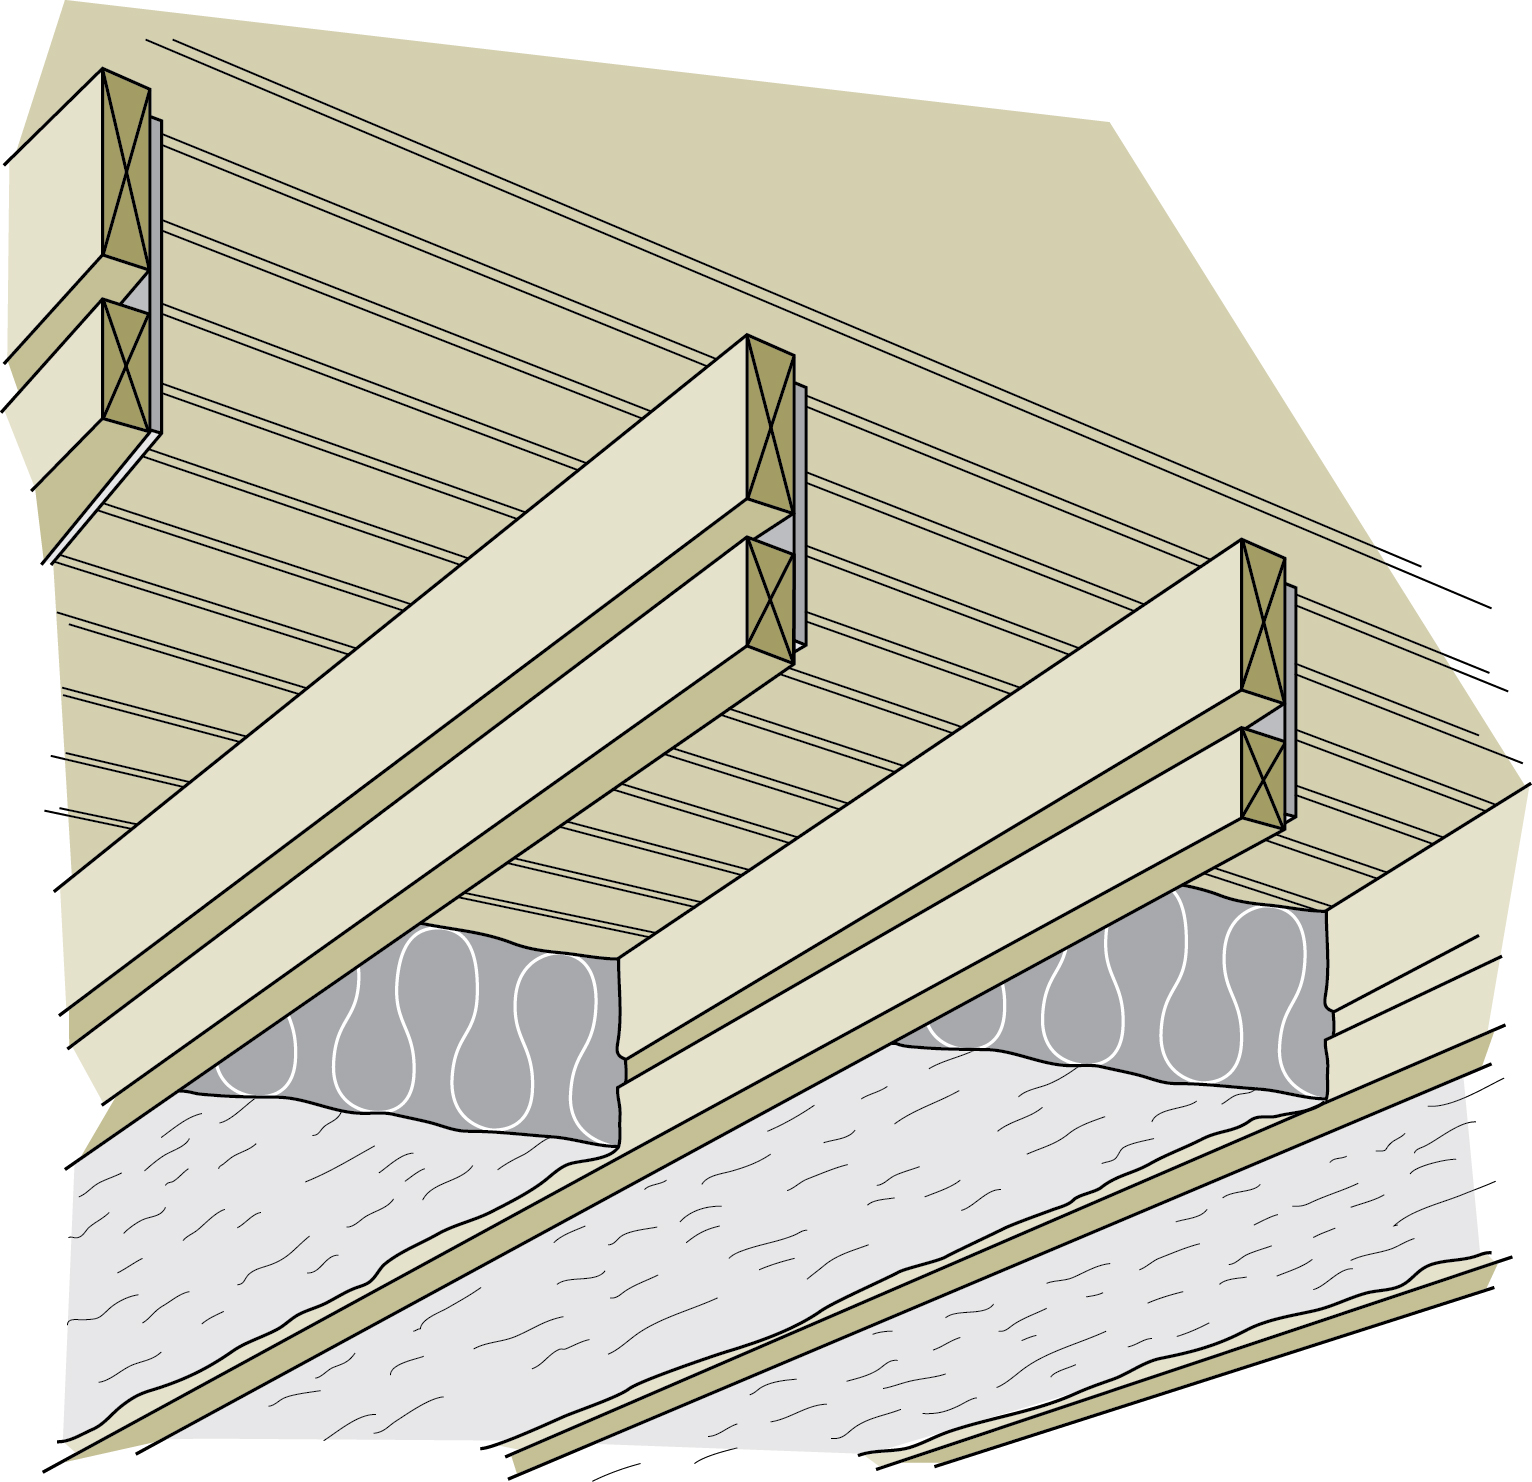 Extending the rafters provides space for insulation and ventilation